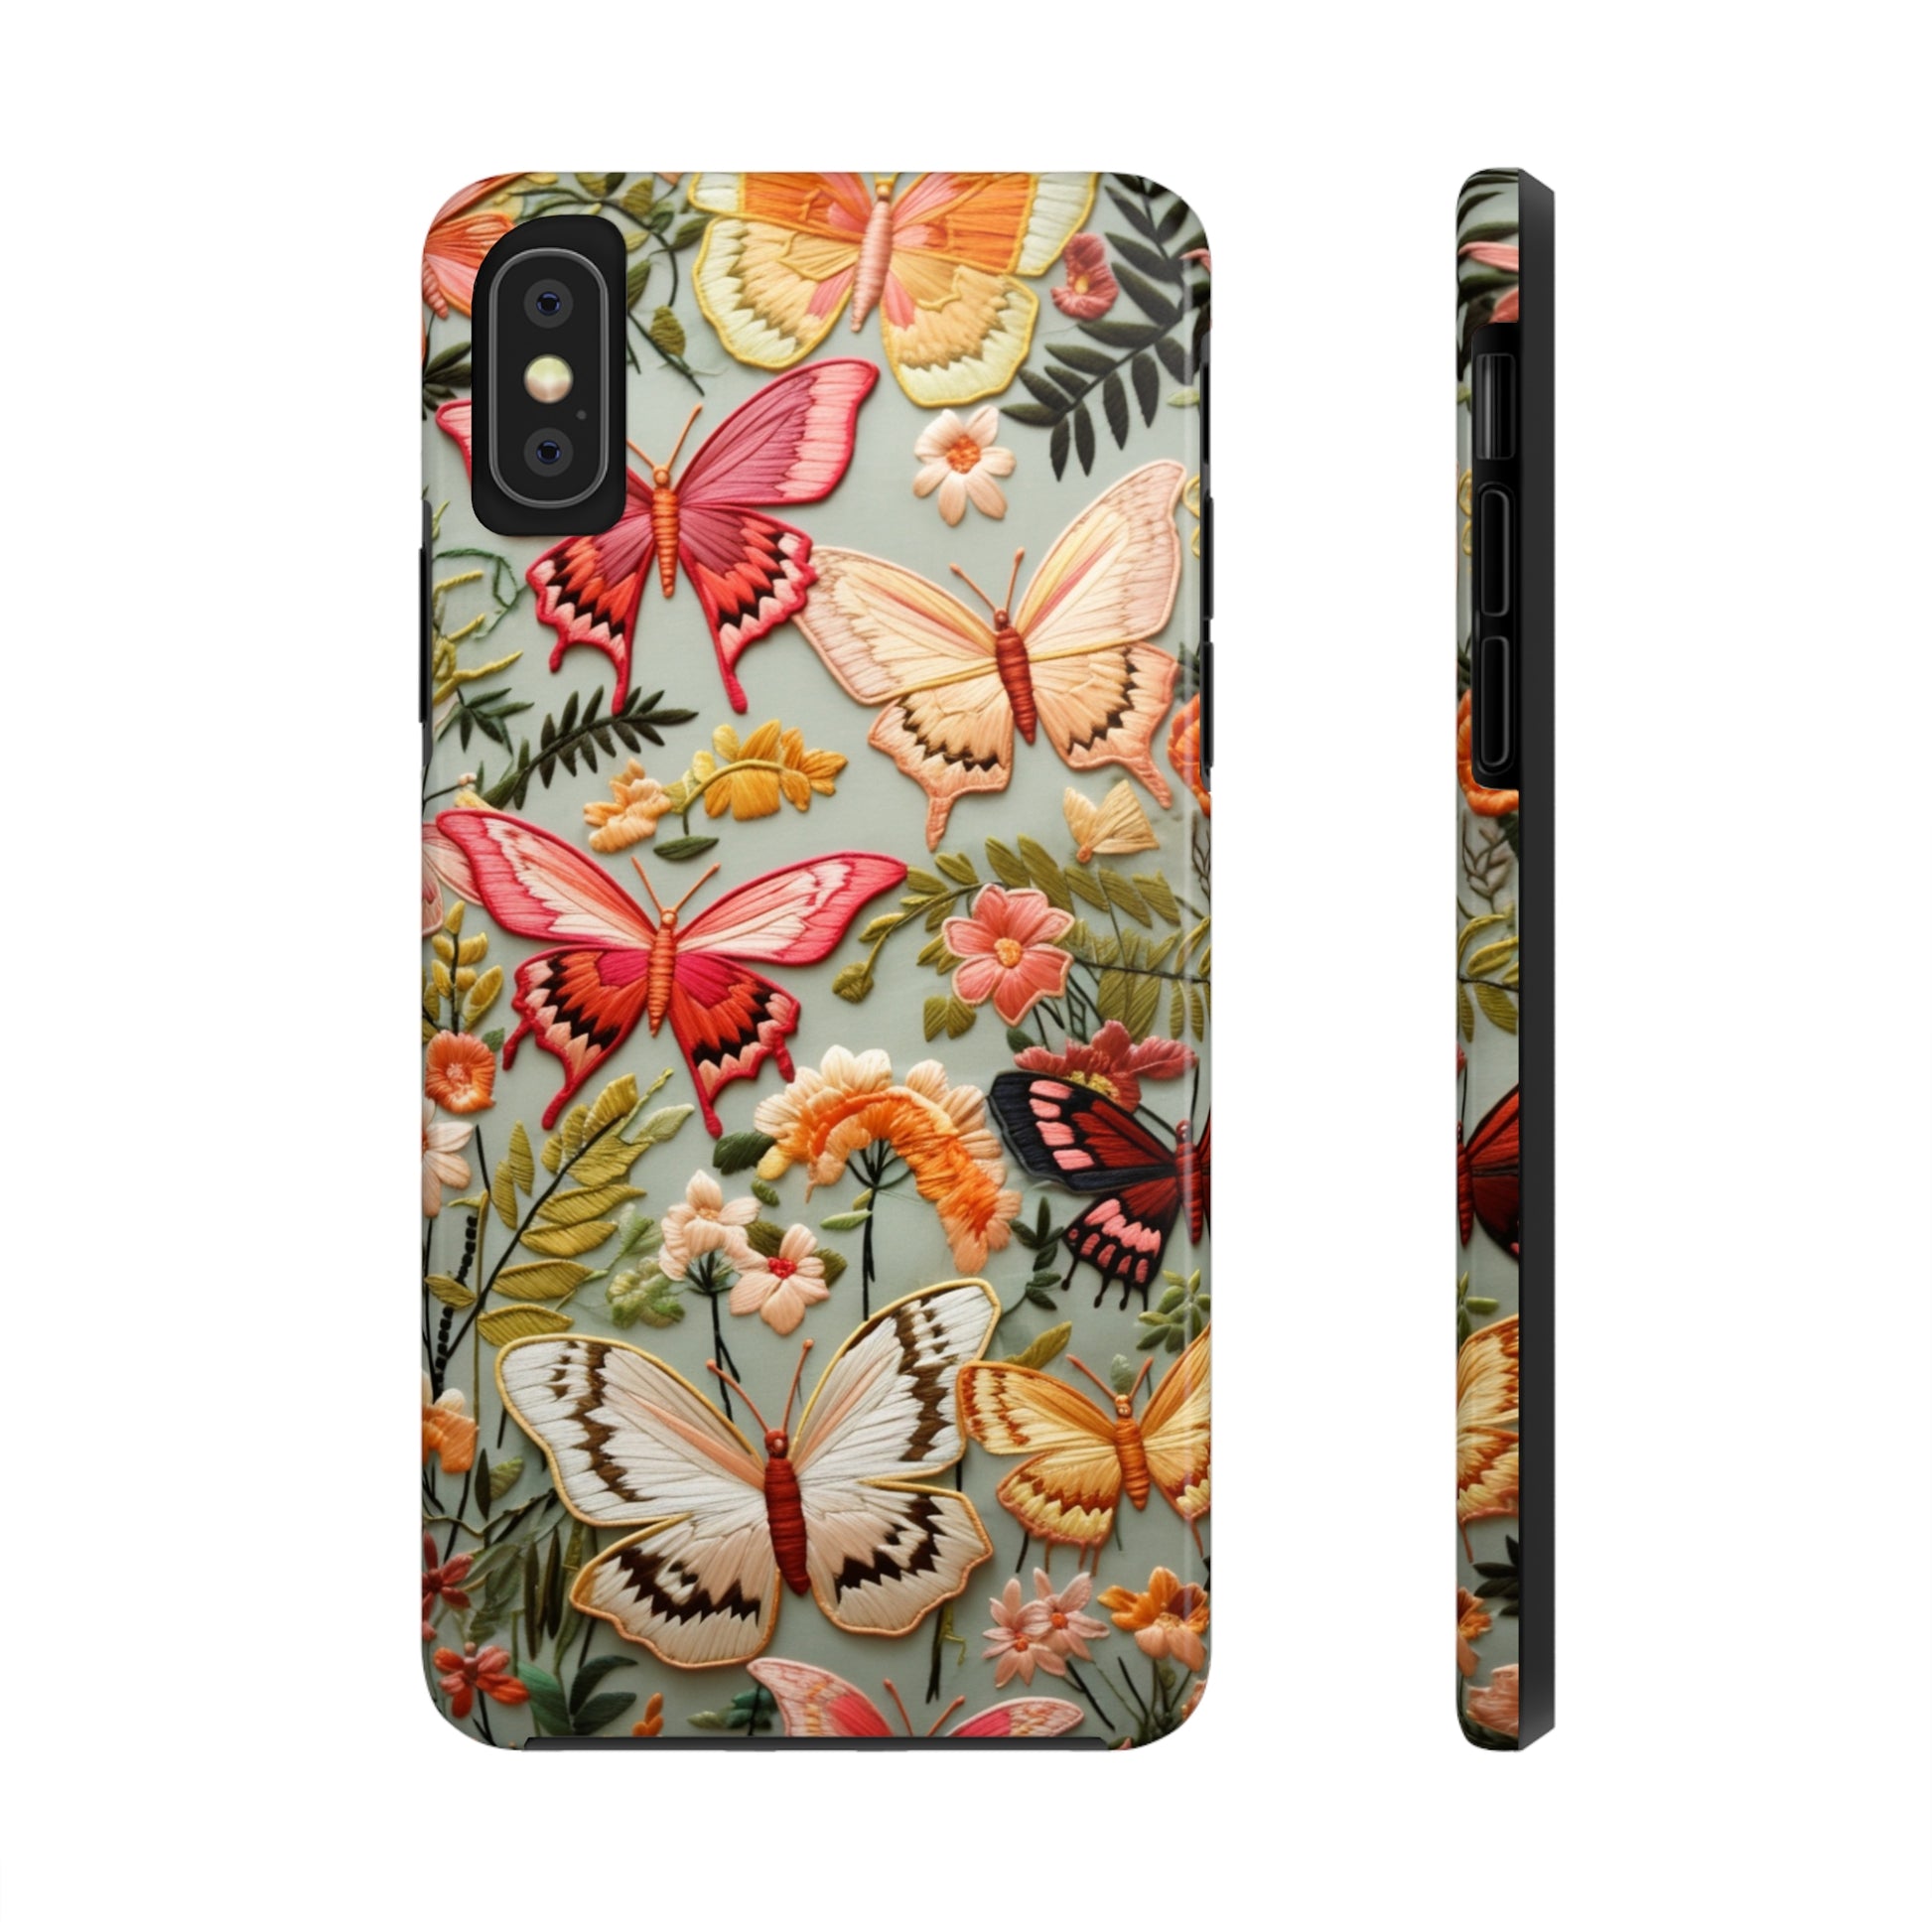 Embroidered butterfly motif iPhone case